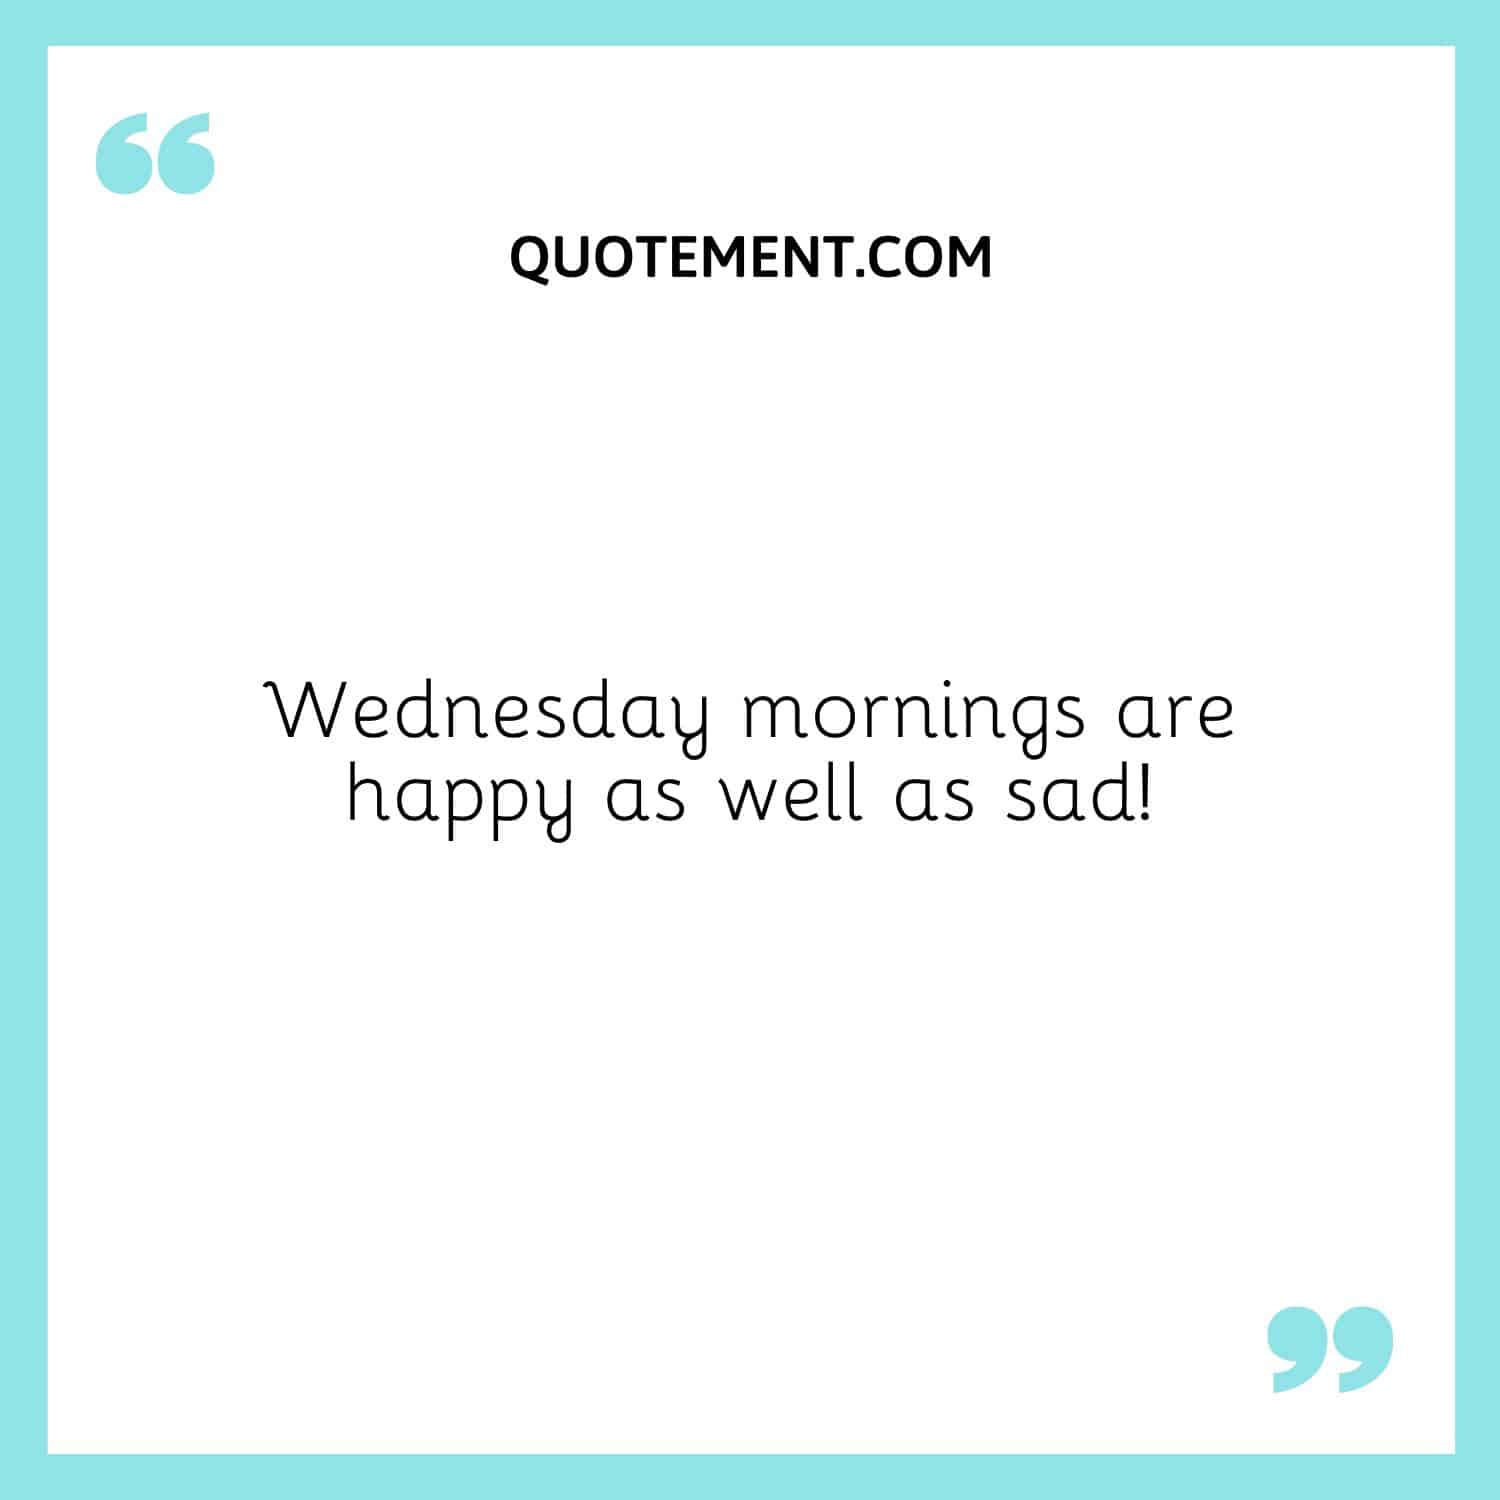 Wednesday mornings are happy as well as sad!